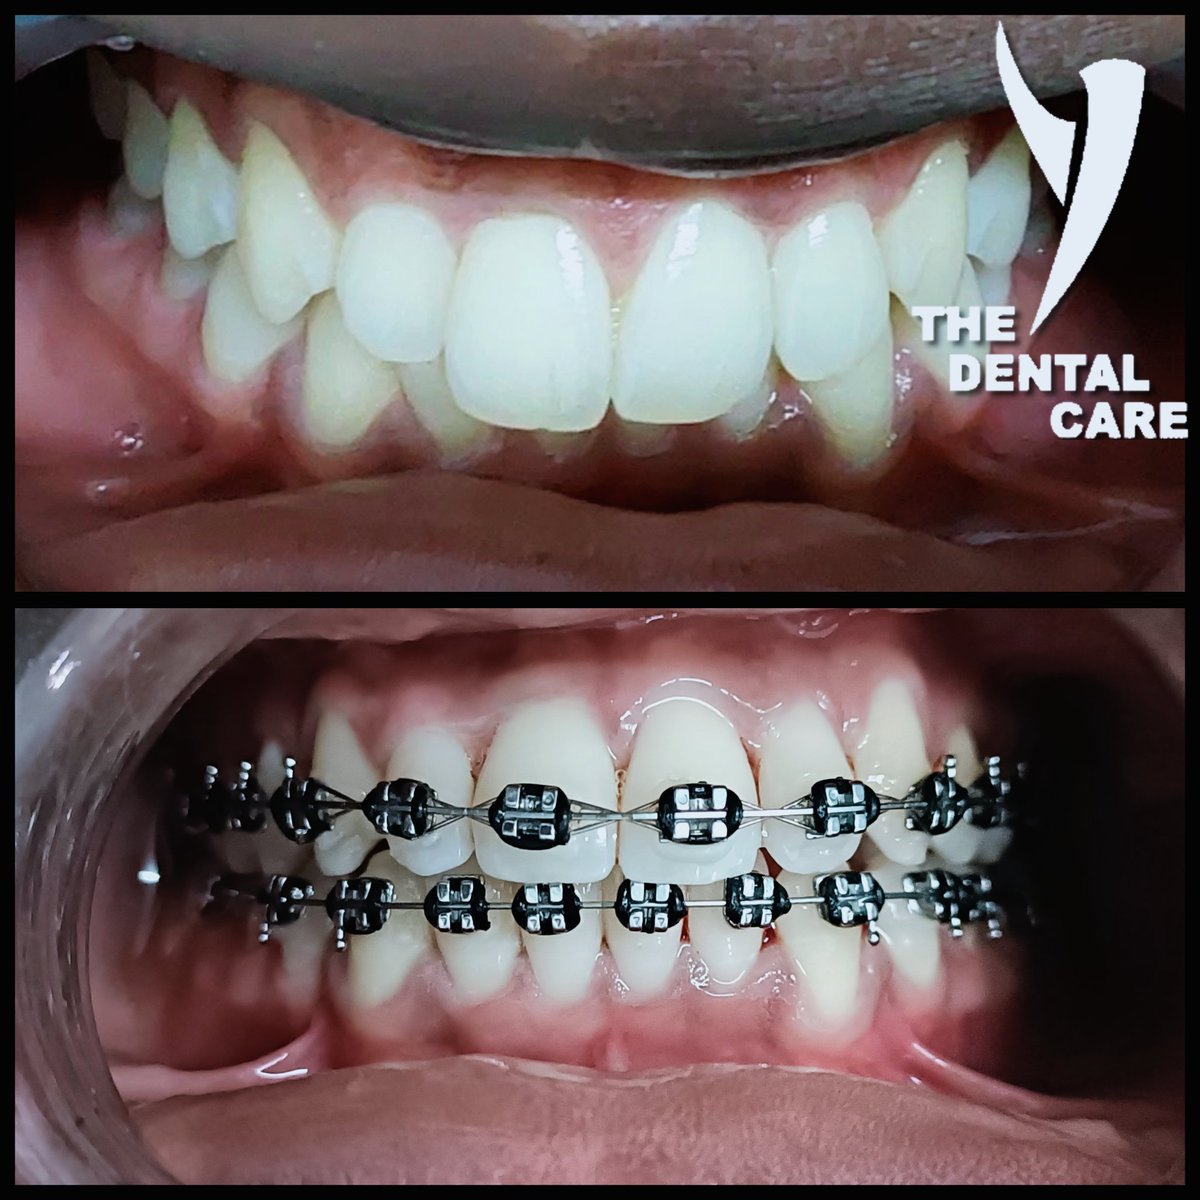 Check out the progress! Our patient has been wearing braces for 6 months and their bite is looking phenomenal!sekodental.co.za